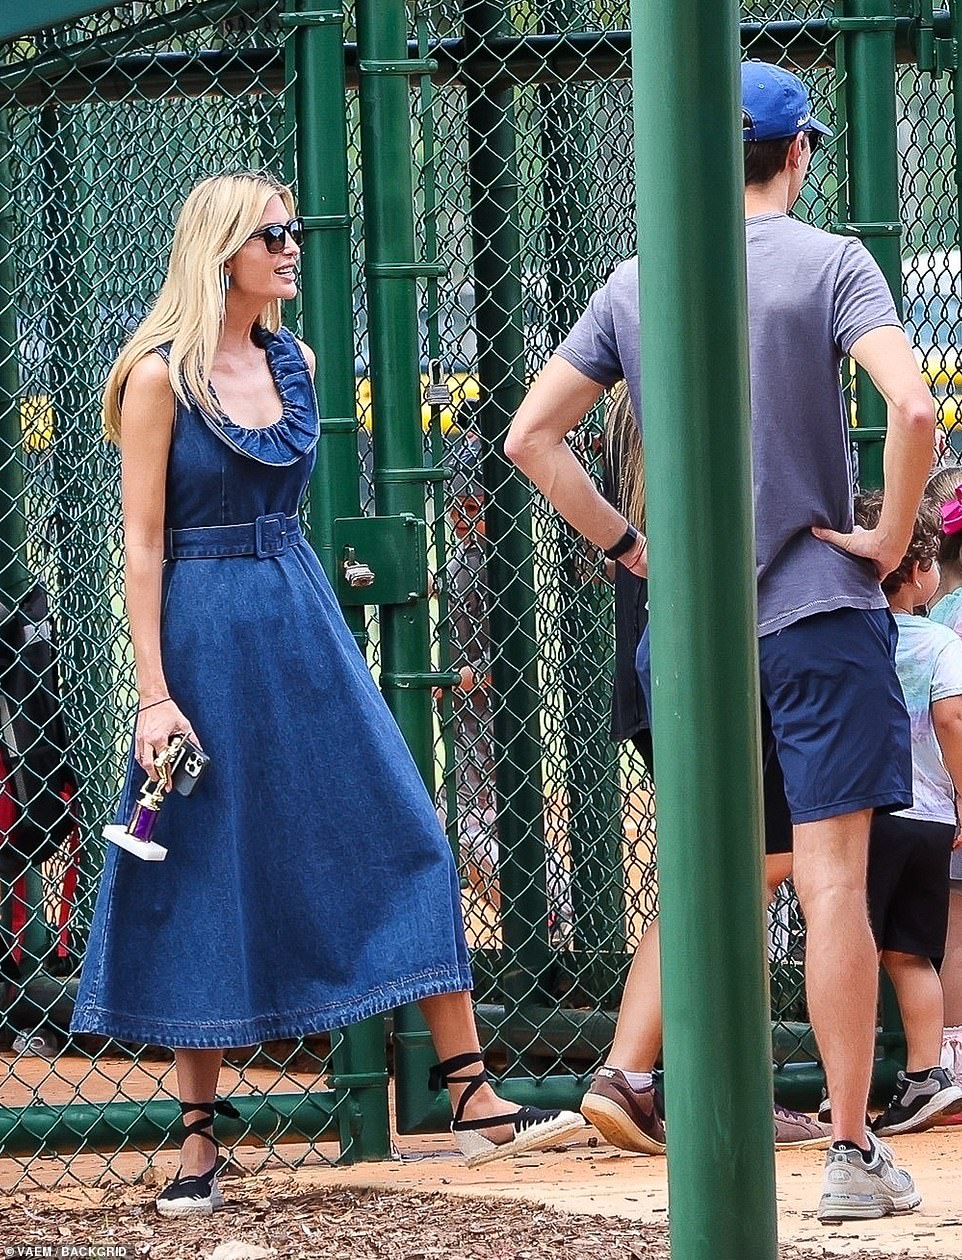 Ivanka elevated her breezy summer dress with a pair of black and cream espadrilles that laced up her ankles